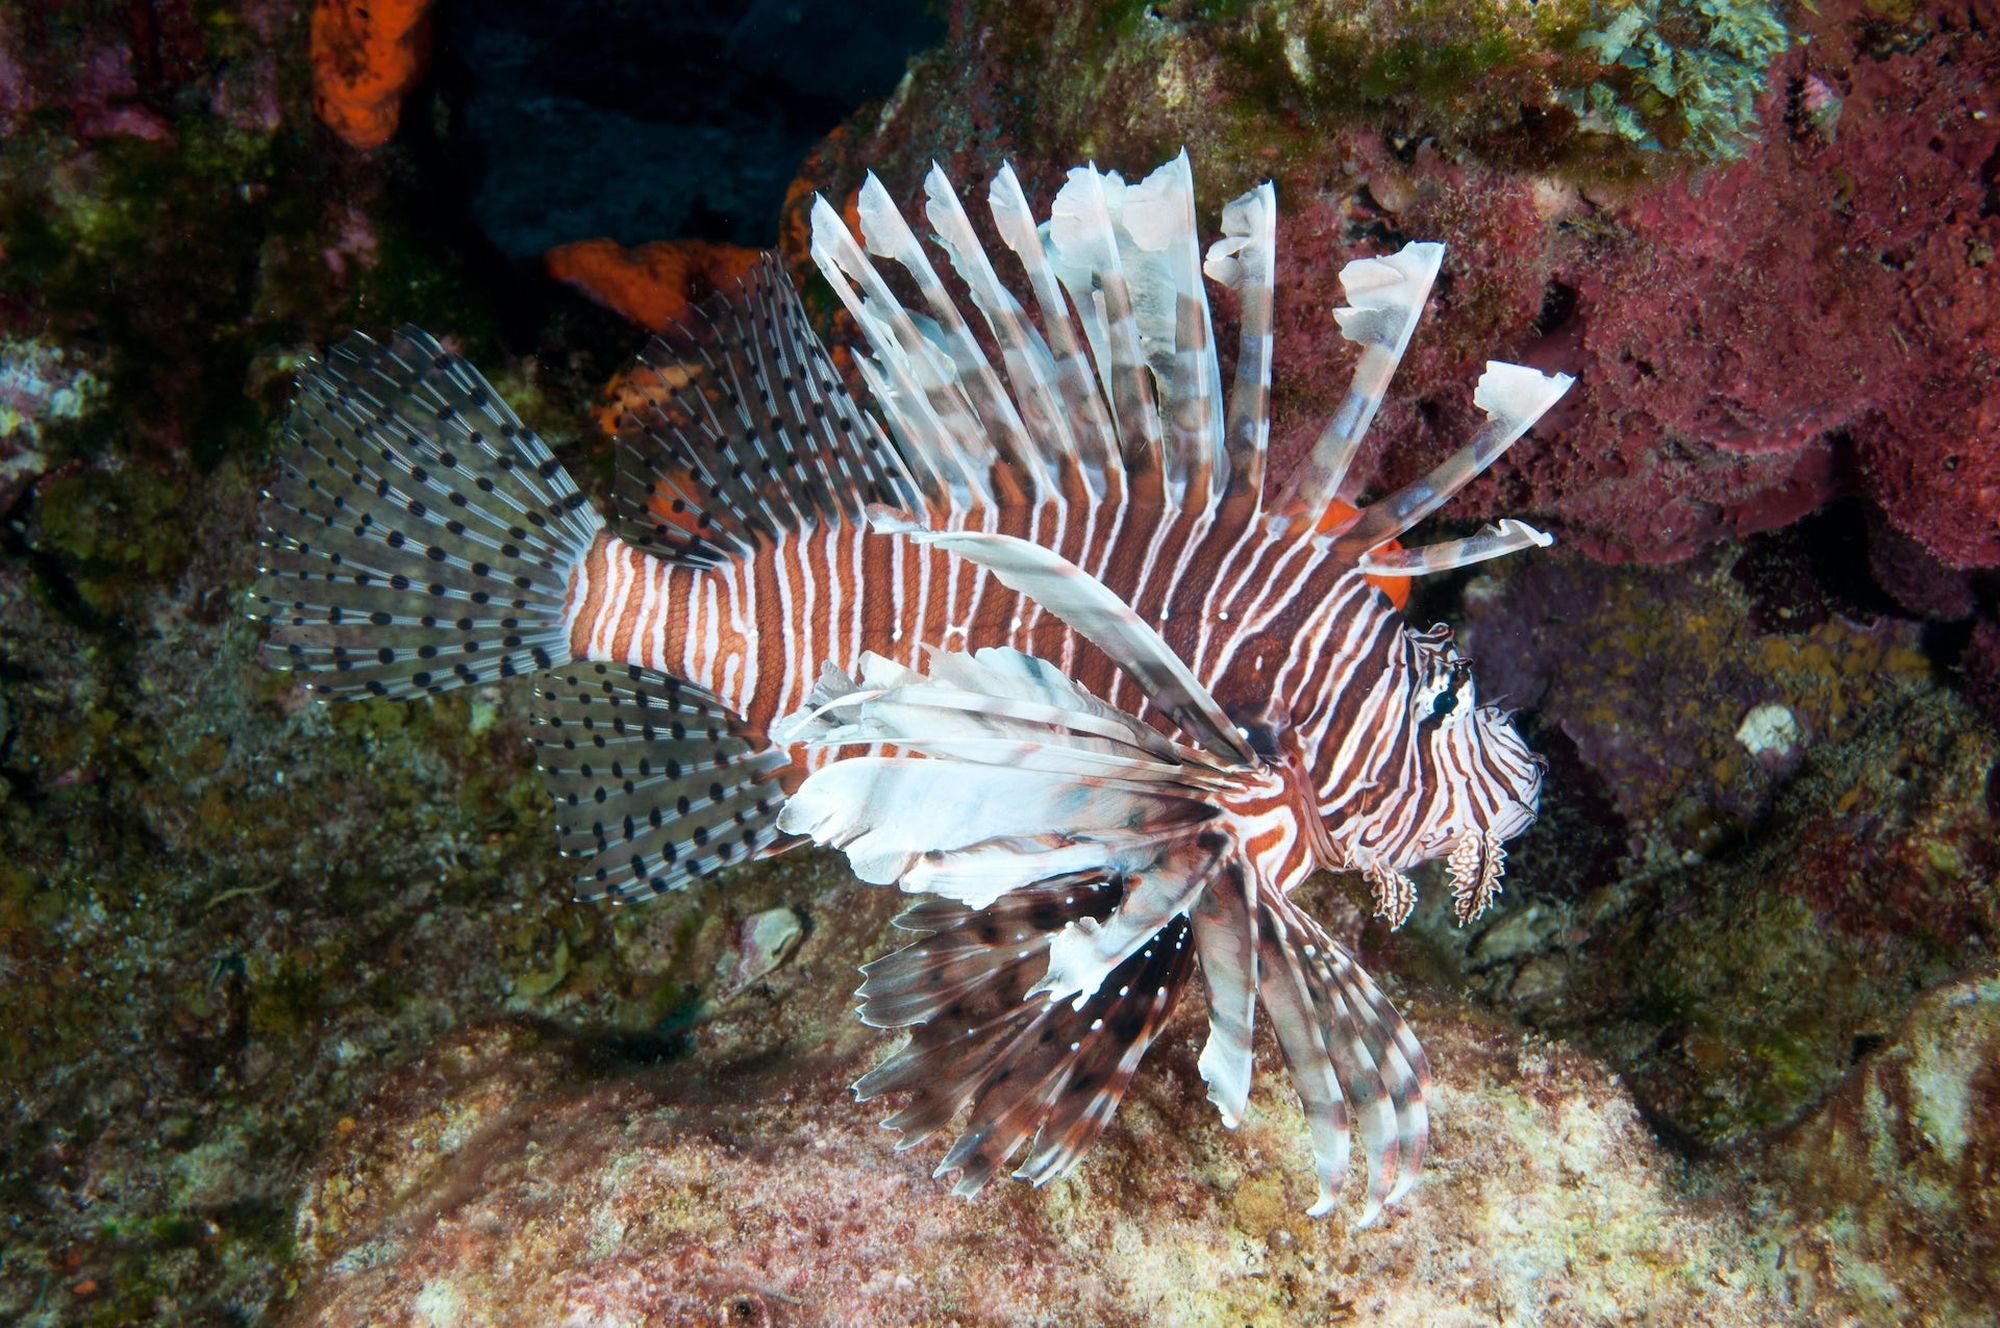 An invasive lionfish at Flower Garden Banks National Marine Sanctuary in the Gulf of Mexico. G. P. Schmahl/NOAA, CC BY